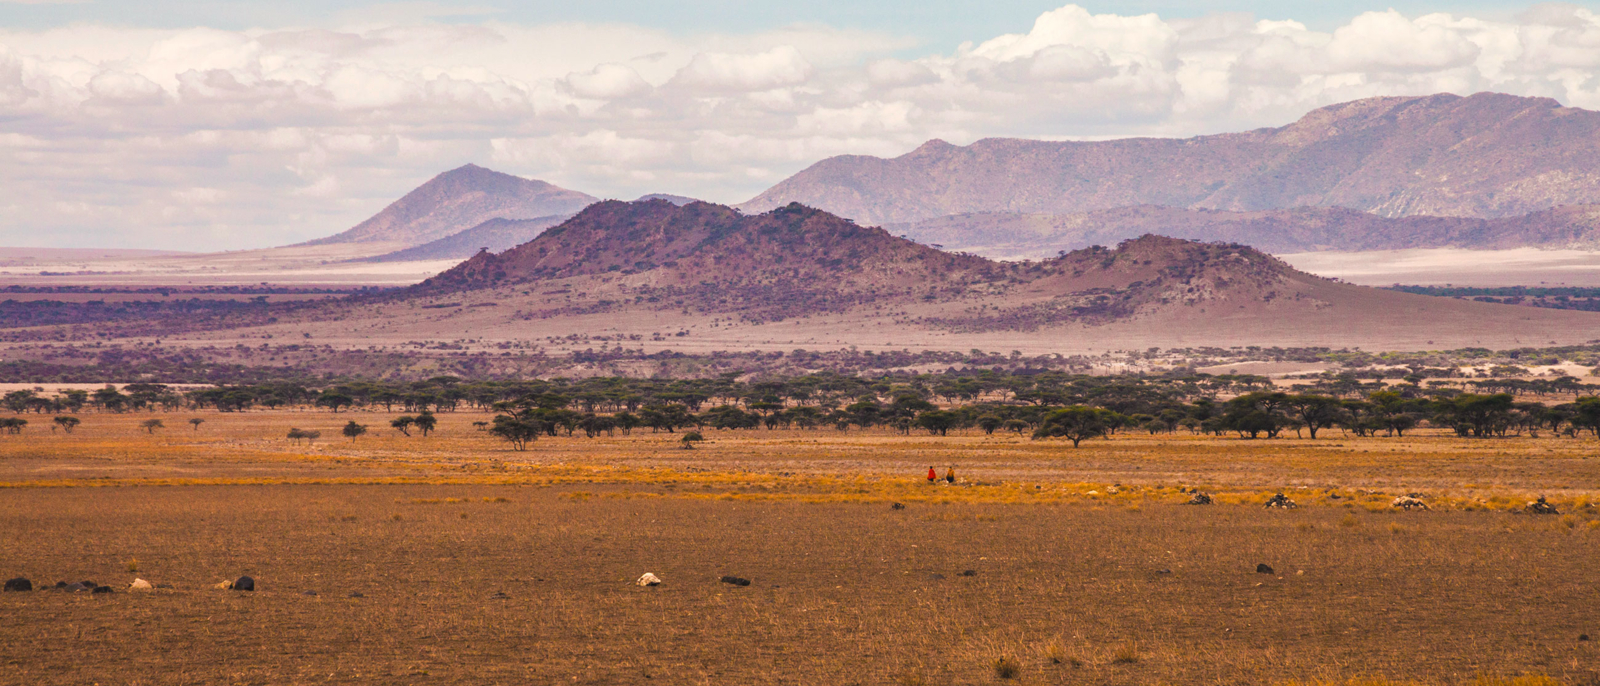 Olduvai plains in Tanzania, one of the cradles of humankind